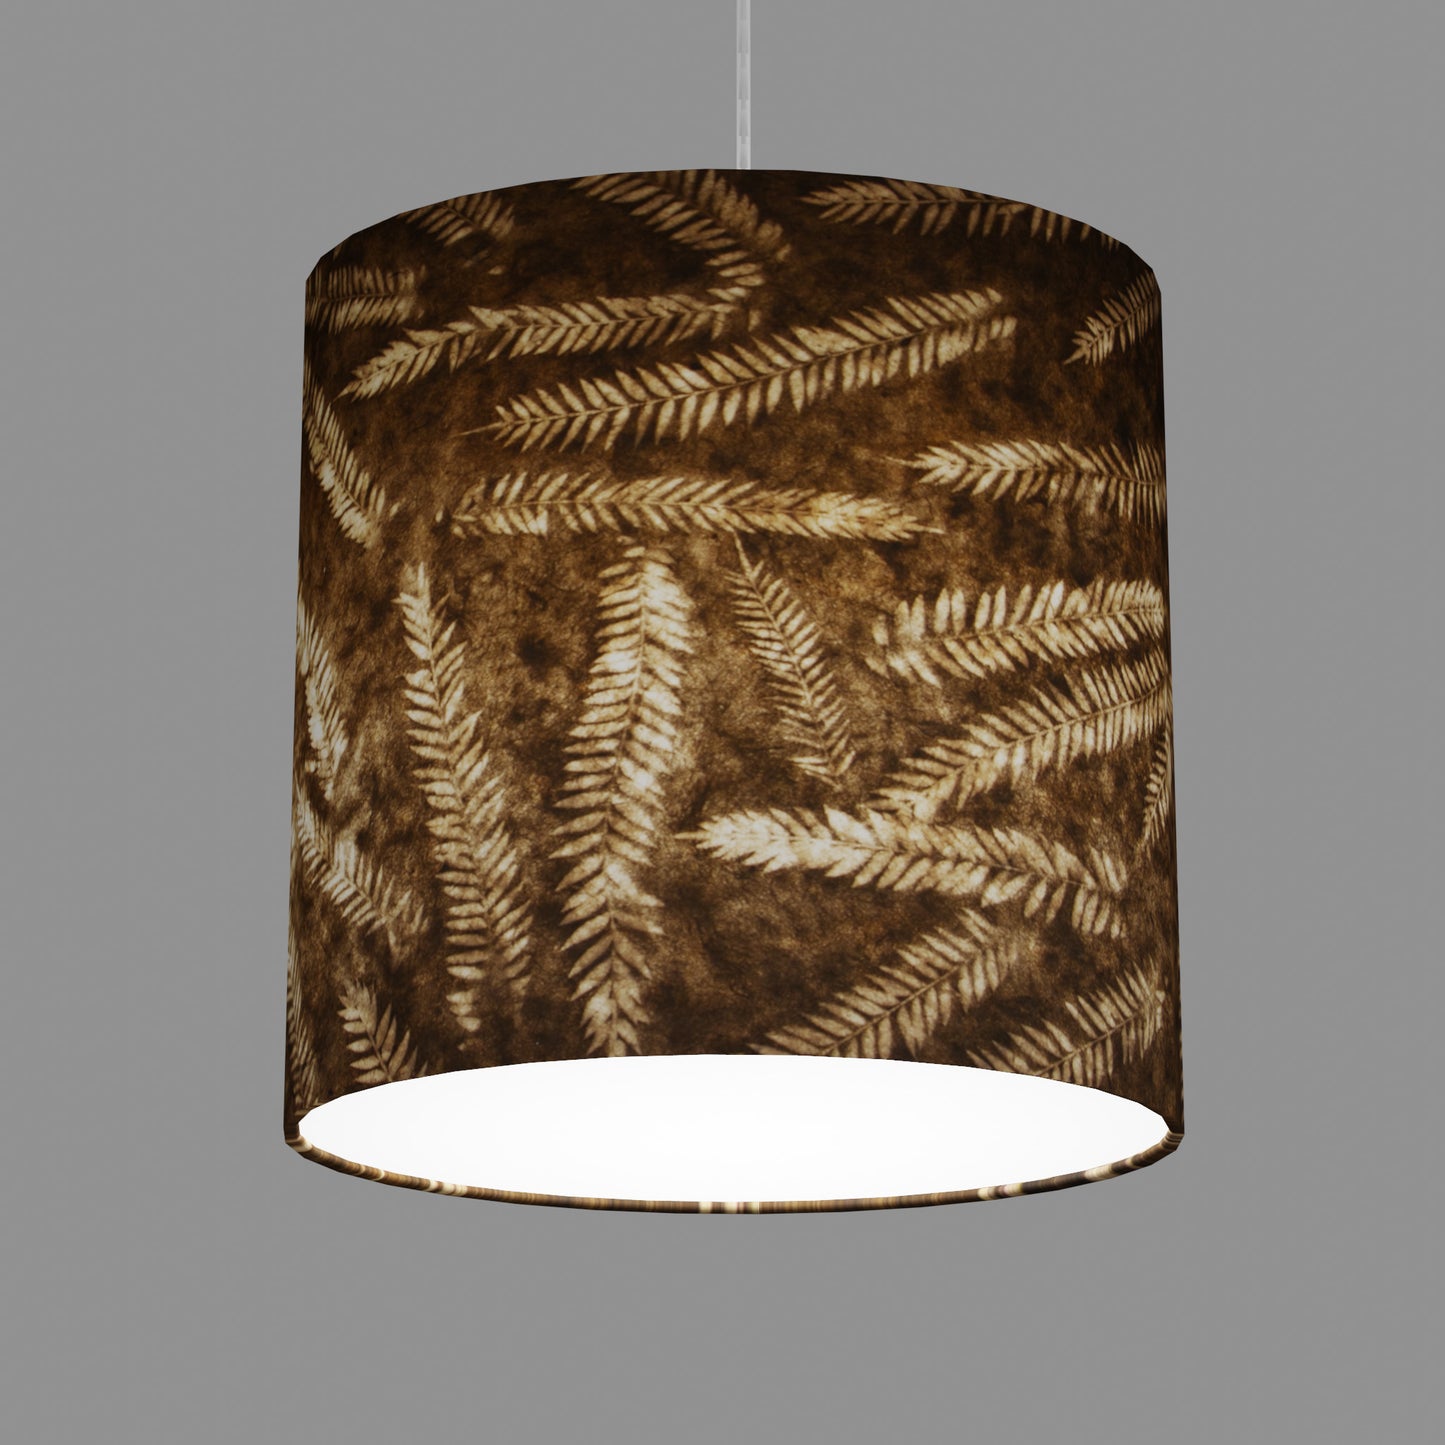 Oval Lamp Shade - P26 - Resistance Dyed Brown Fern, 30cm(w) x 30cm(h) x 22cm(d)